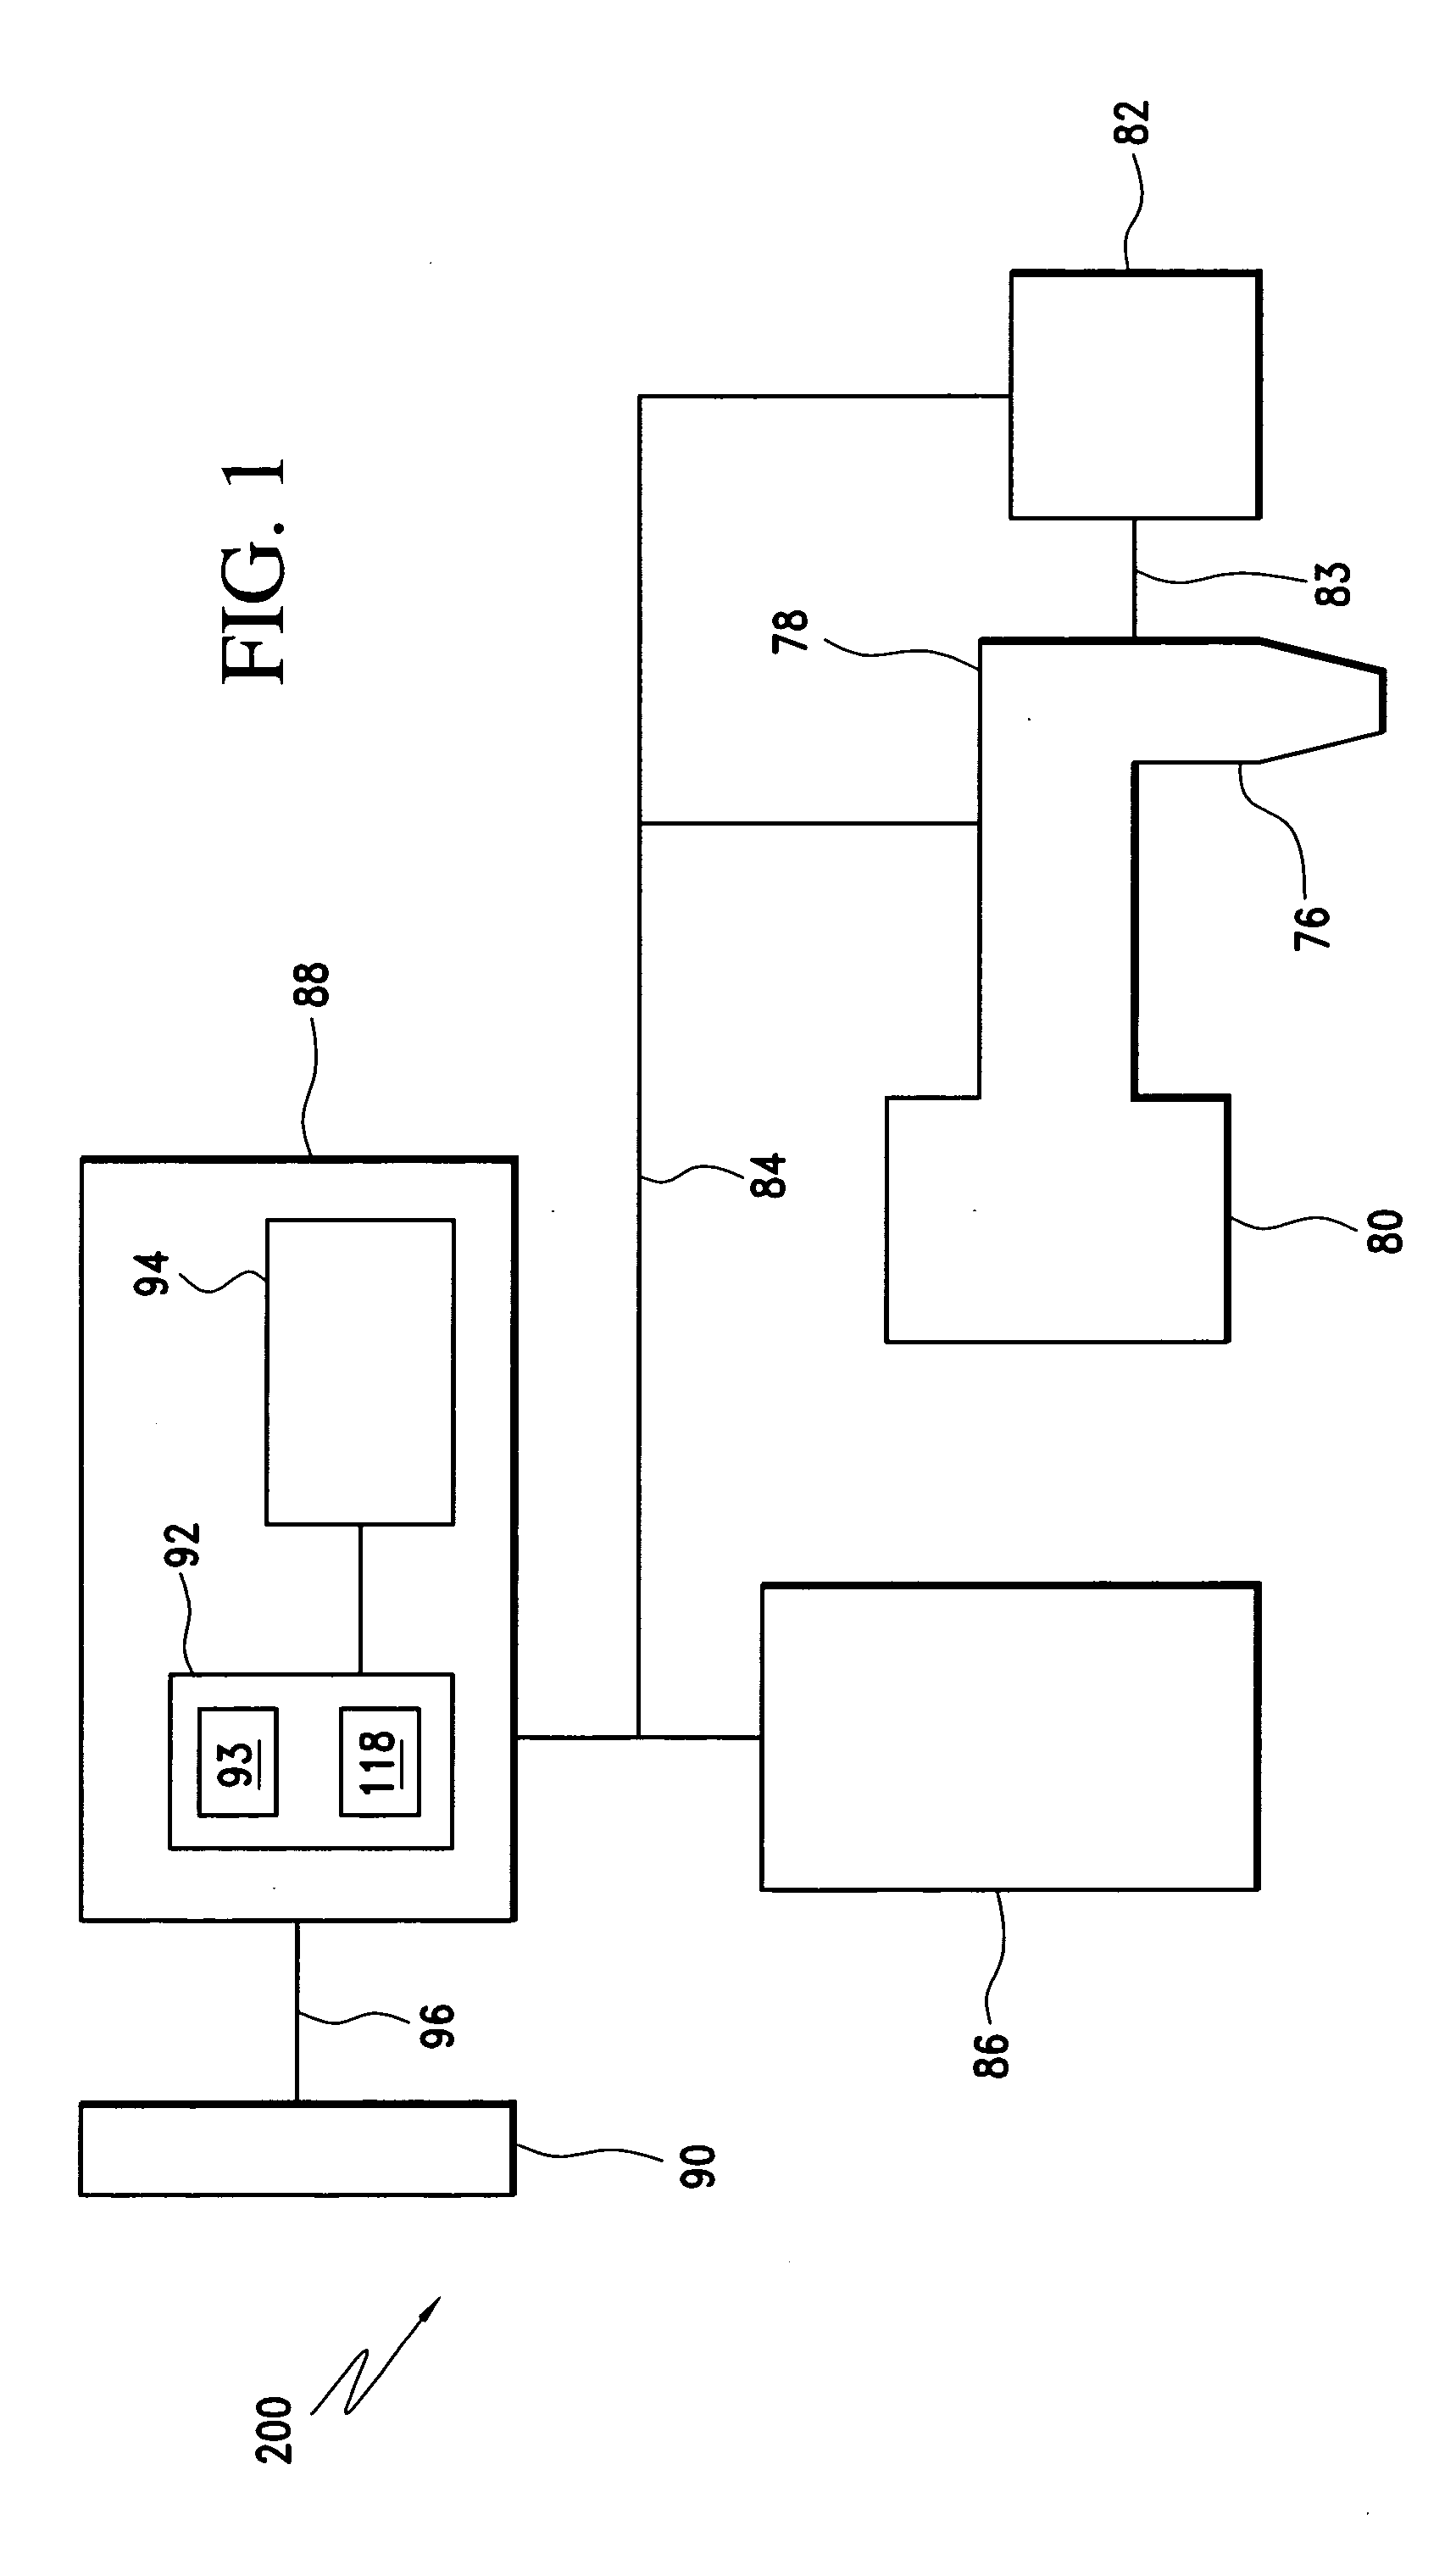 System and process for manufacturing application specific printable circuits (ASPC'S) and other custom electronic devices